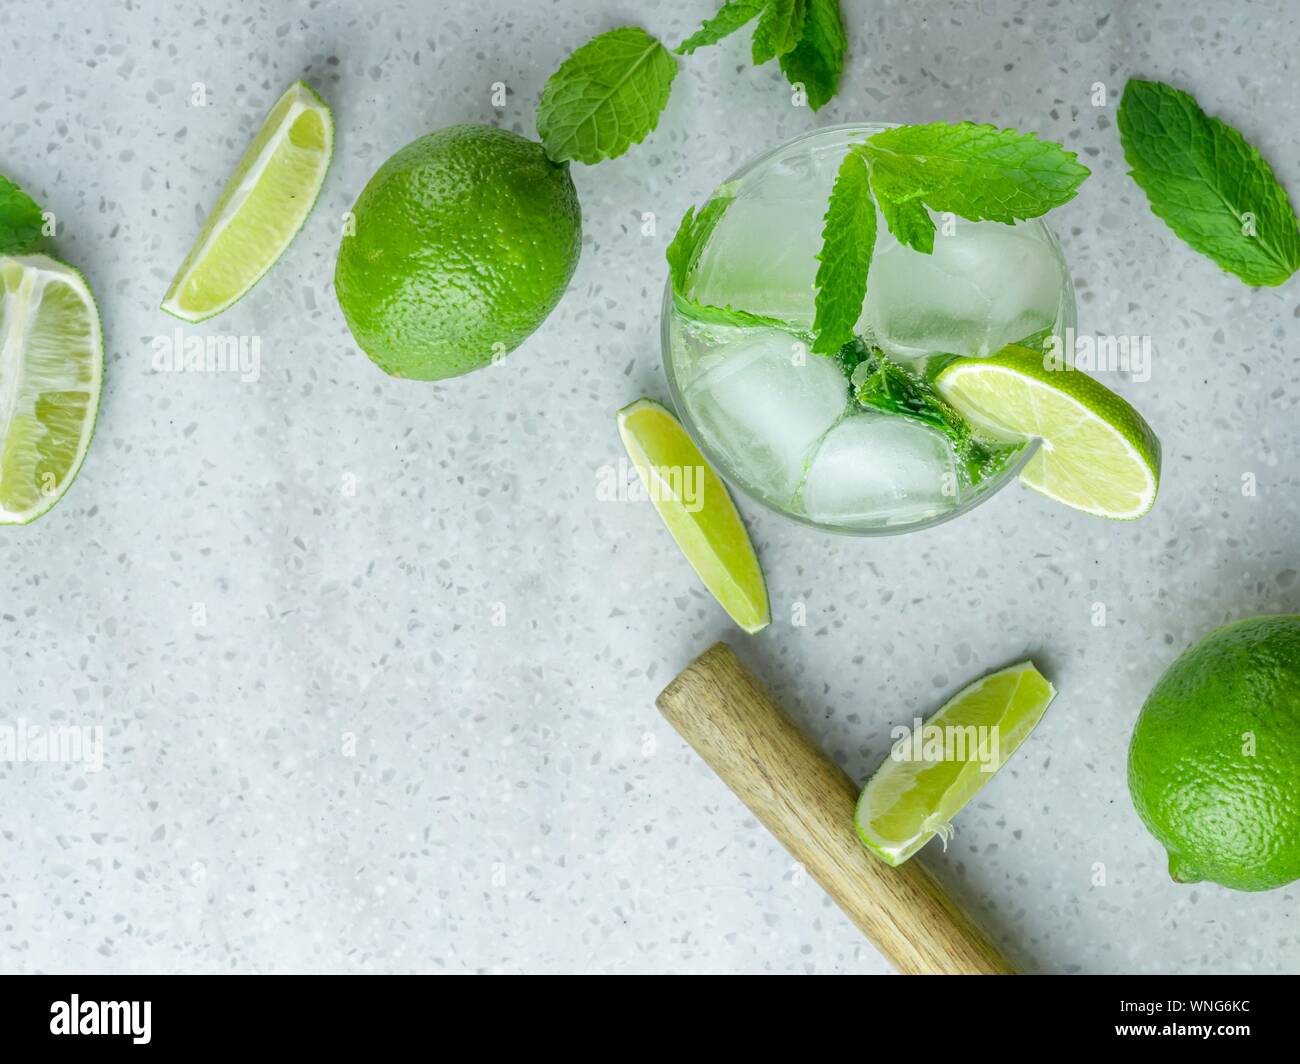 A top down view of a mojito cocktail made from fresh mint and lime in a cut glass tumbler against a pale background Stock Photo